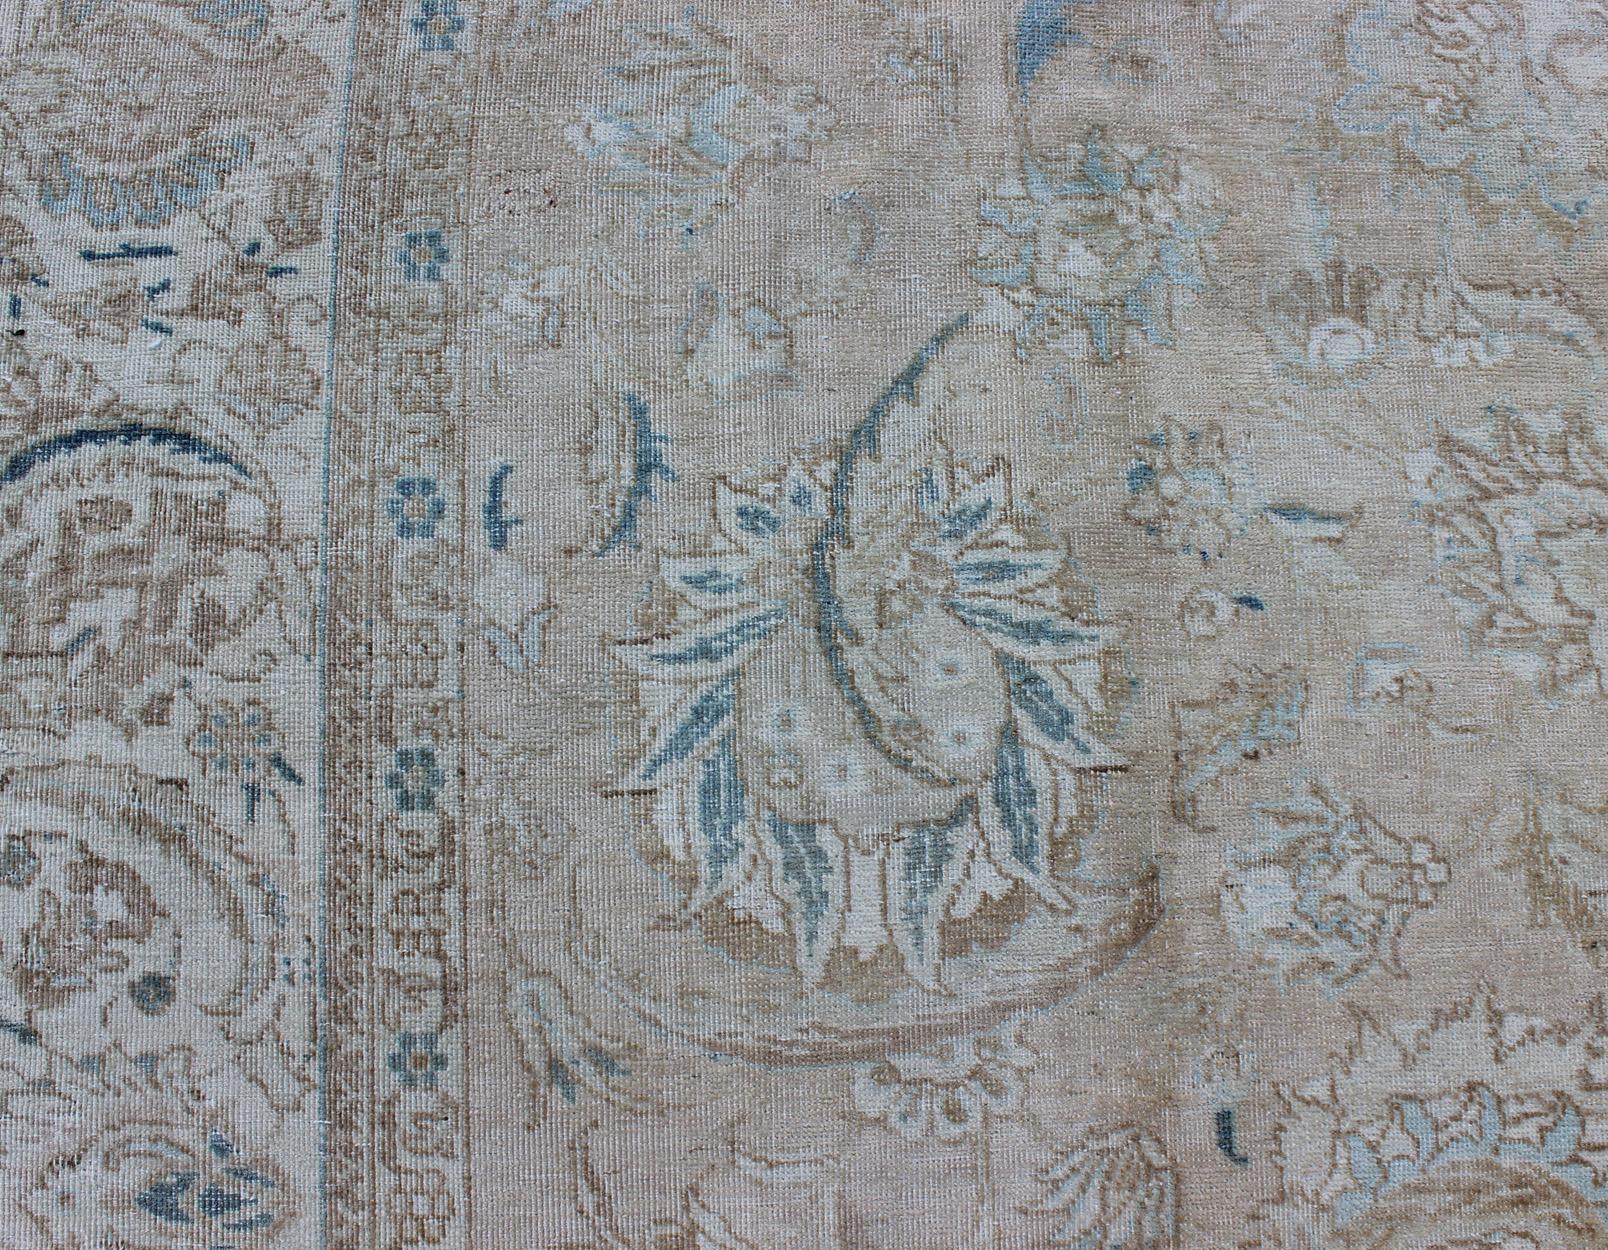 Mid-20th Century Muted Gray, Blue, and Ivory Vintage Persian Tabriz Rug with Floral Design For Sale